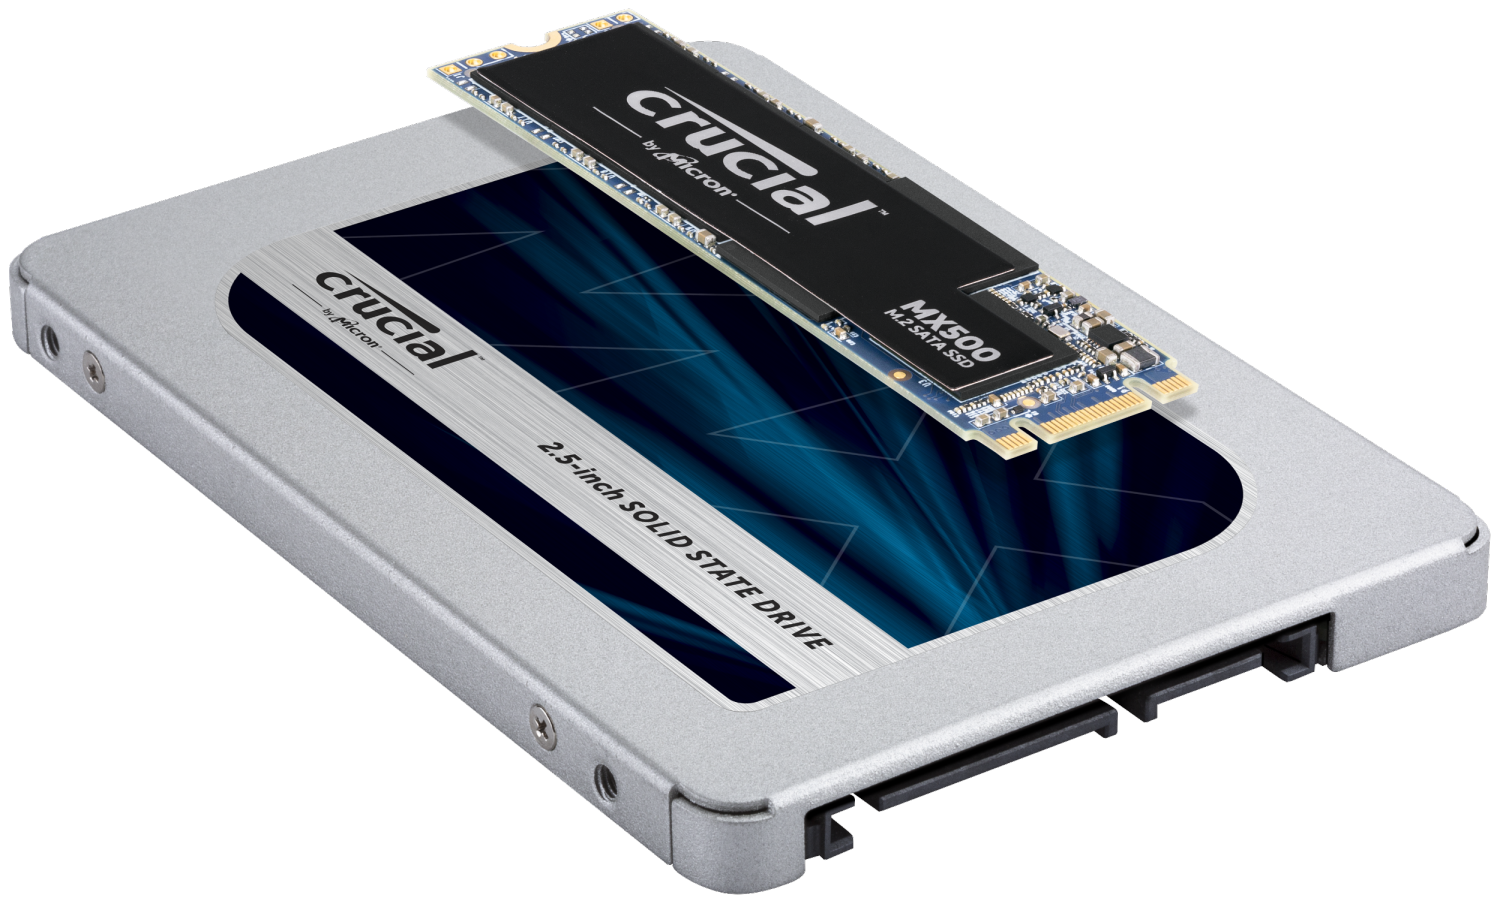 Crucial® MX500 SSD - SSD built on quality, speed, and security.